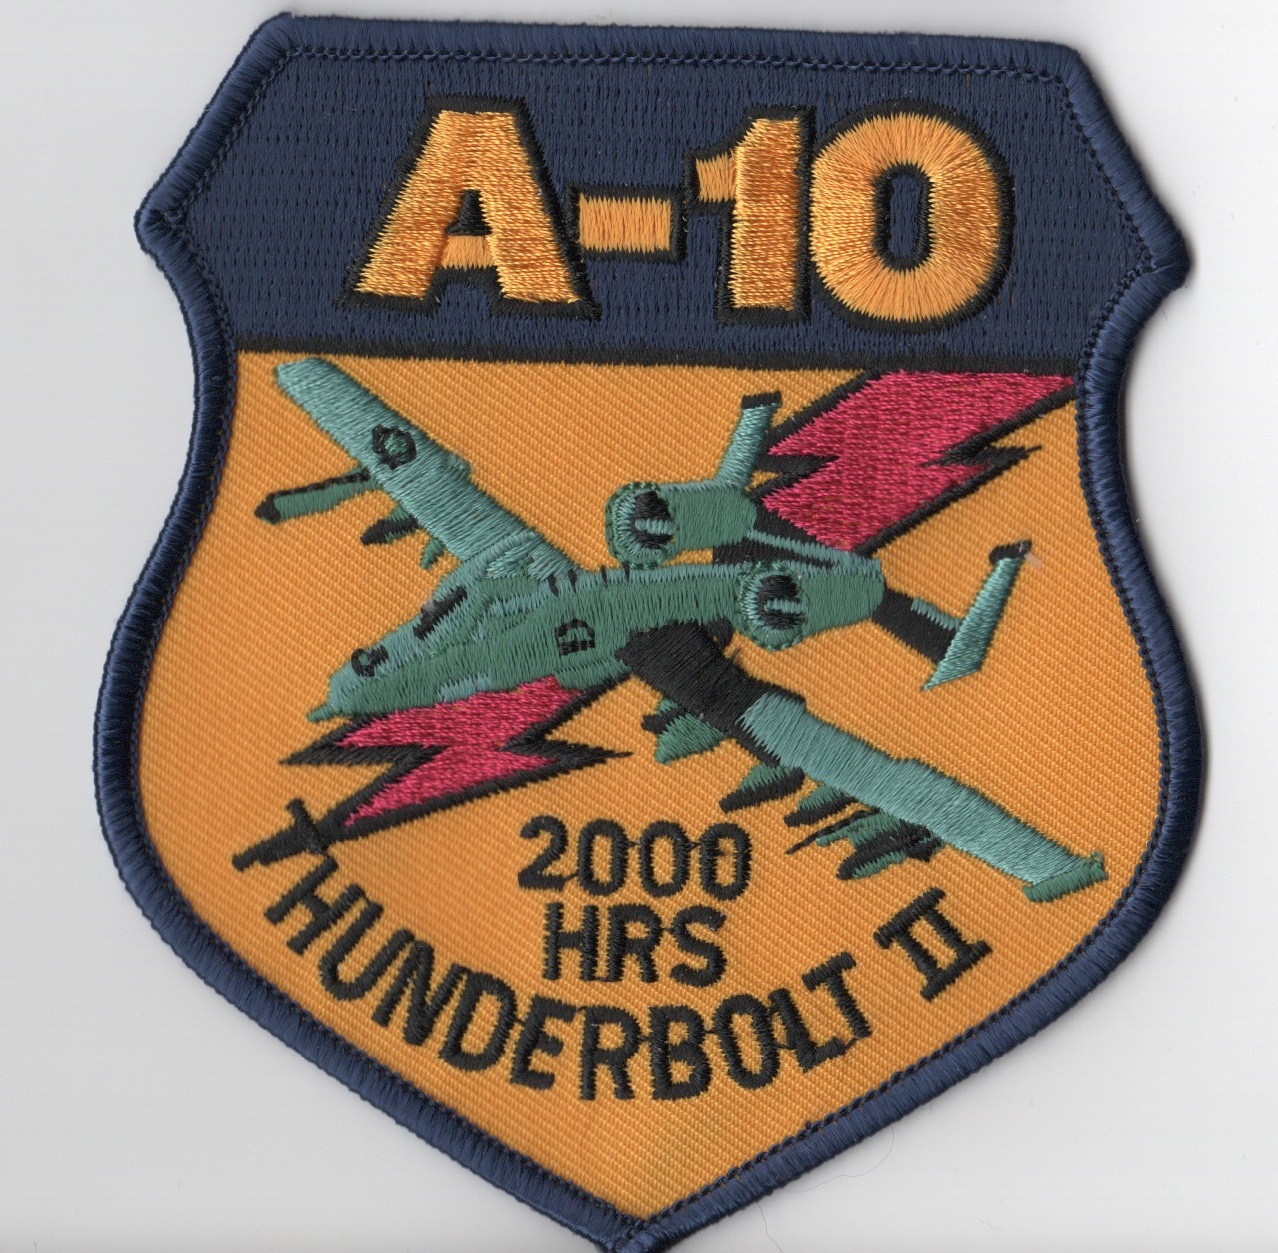 A-10 2000 Hours (Green A/C)